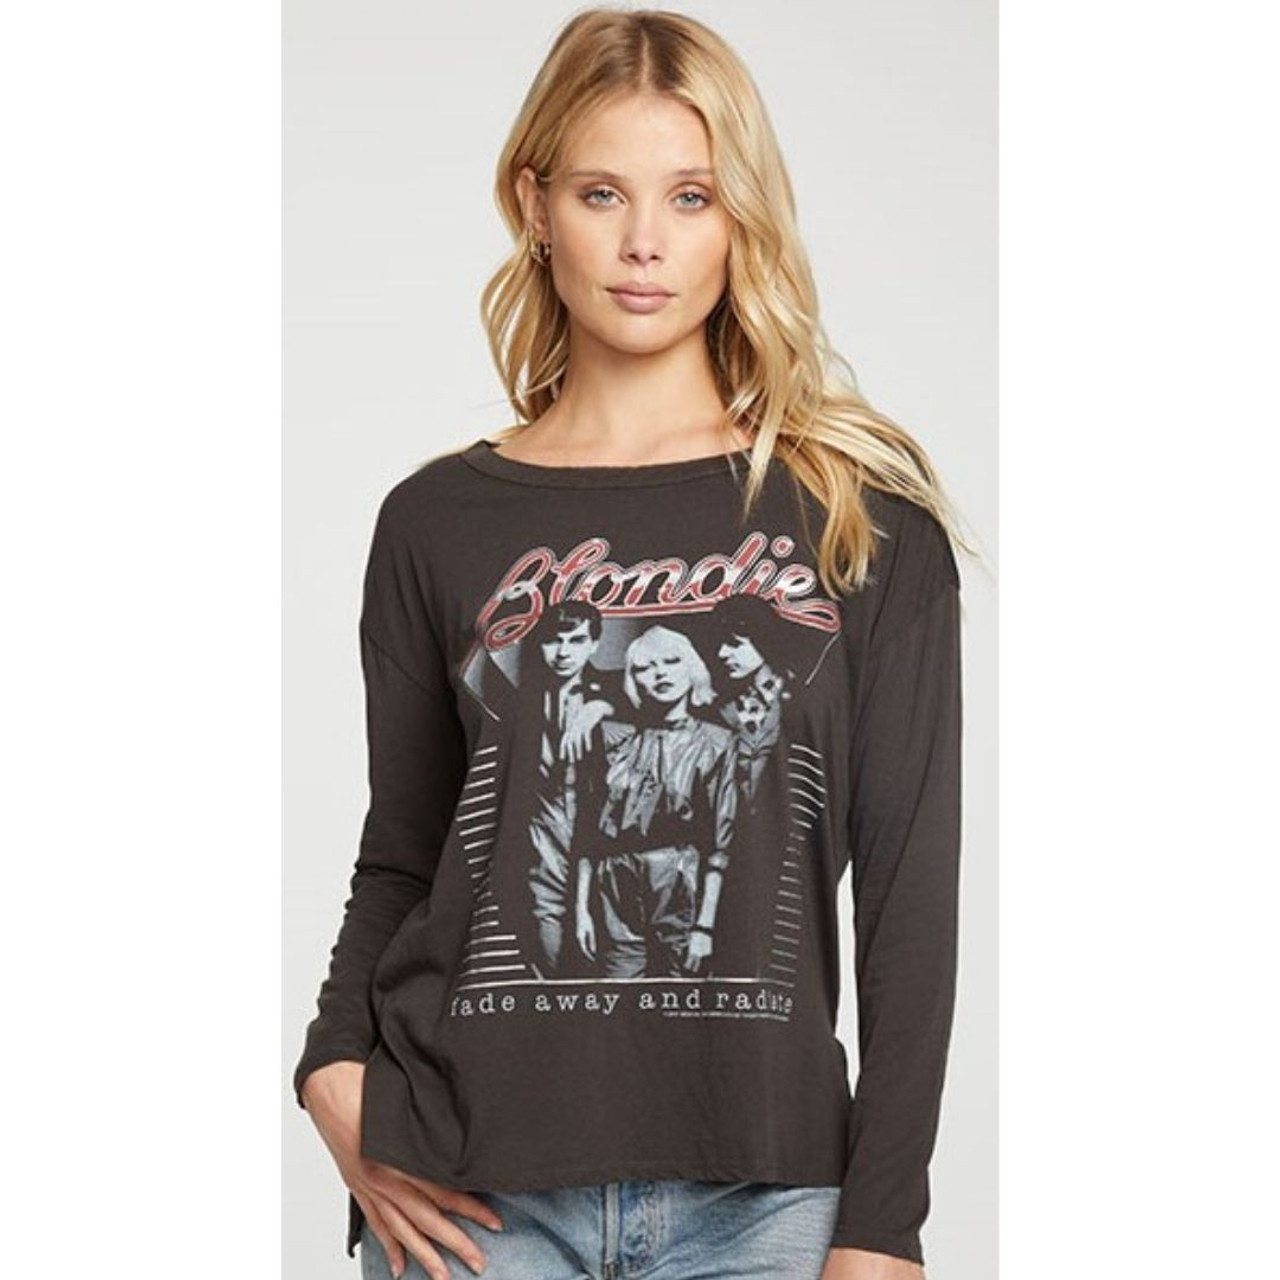 Blondie Long Sleeve by Chaser - Band Photograph with Fade Away and Radiate  Song Title